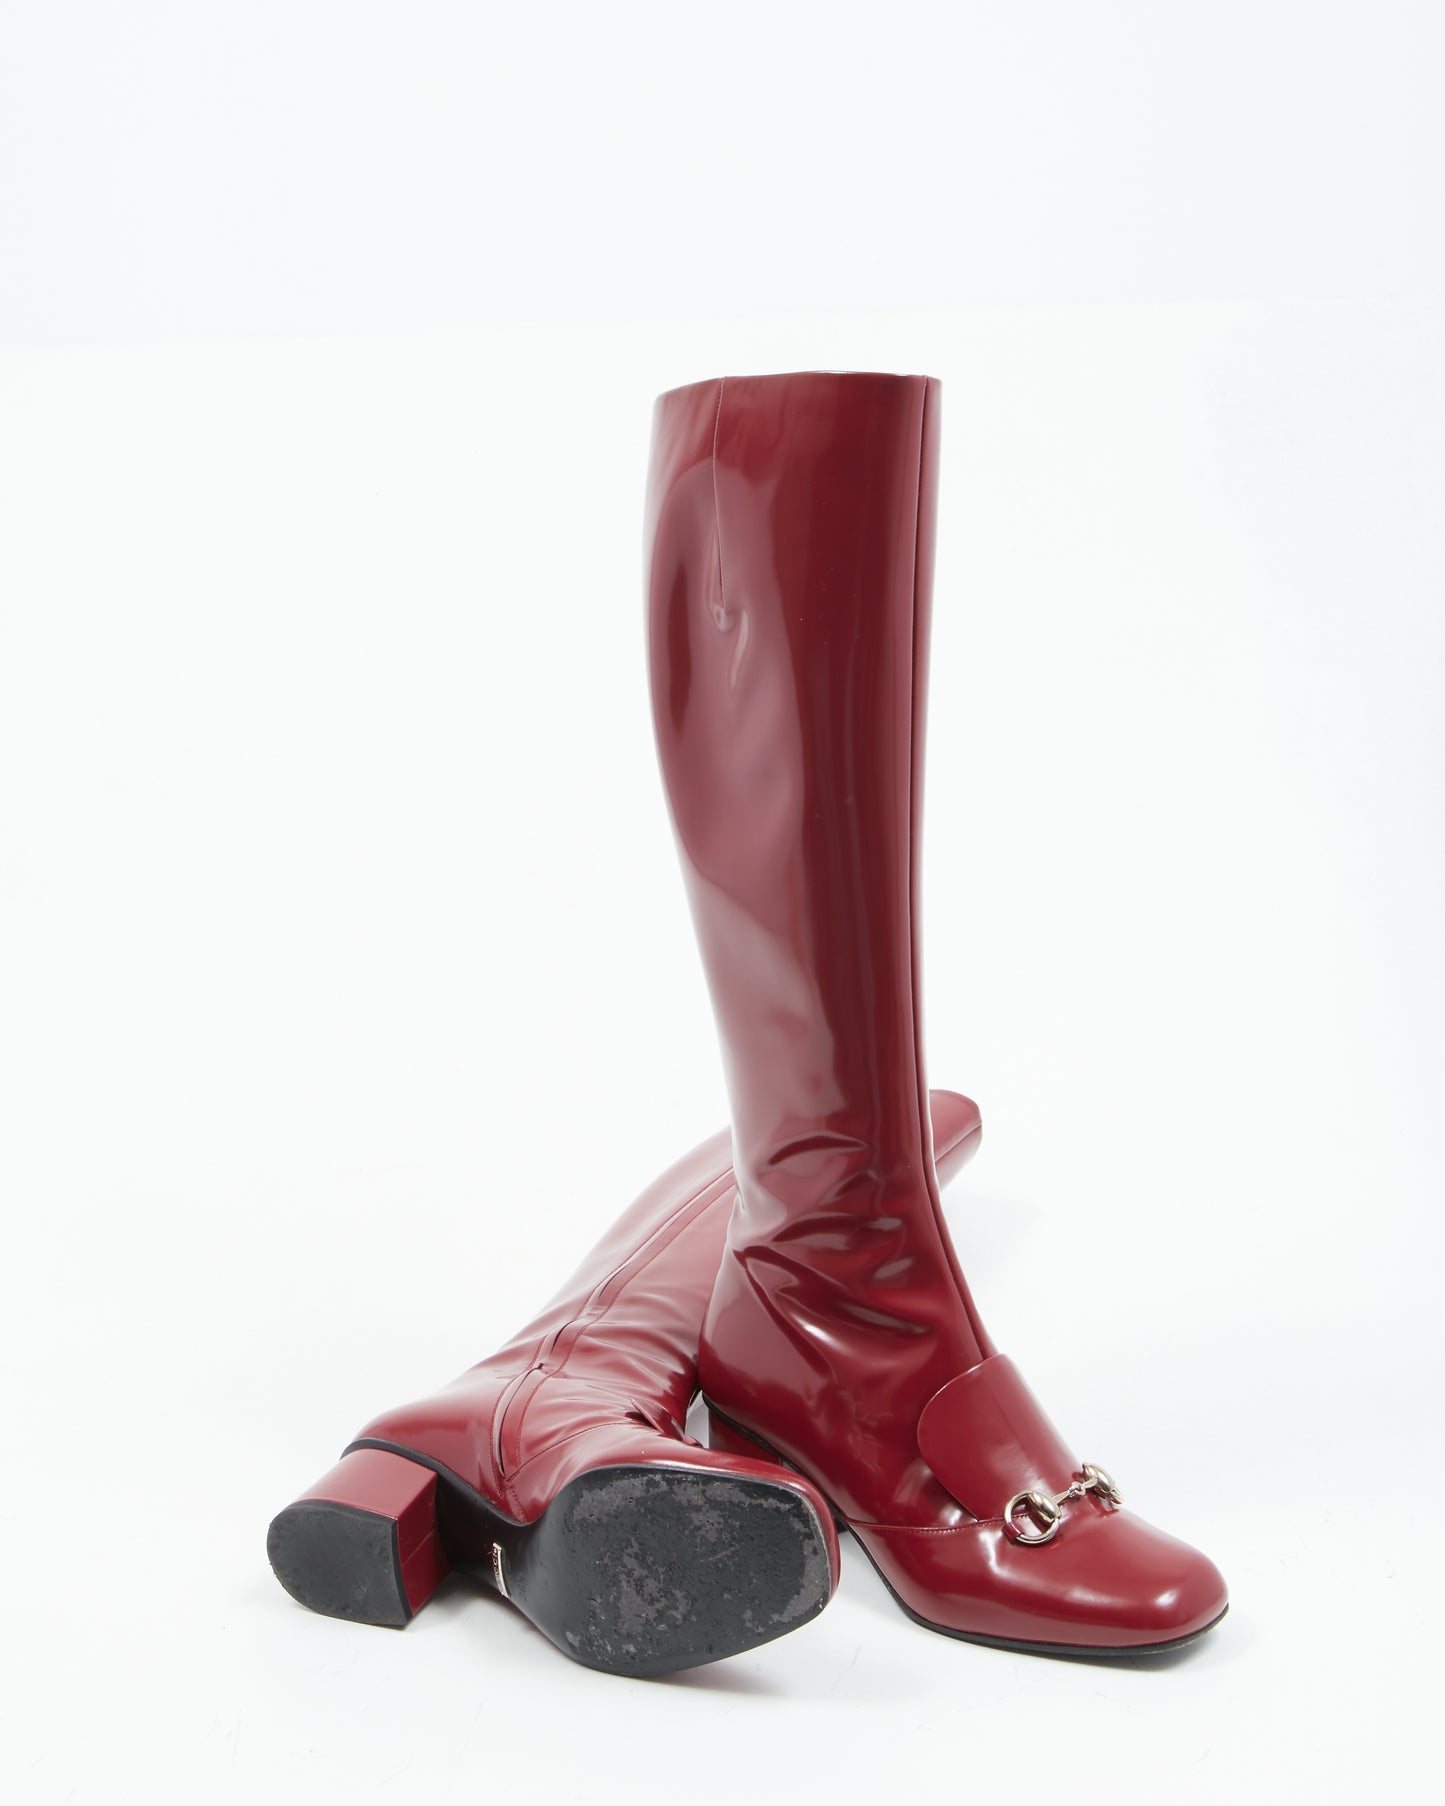 Gucci Wine Red Patent Leather Horsebit Accent Knee-High Boots - 36.5